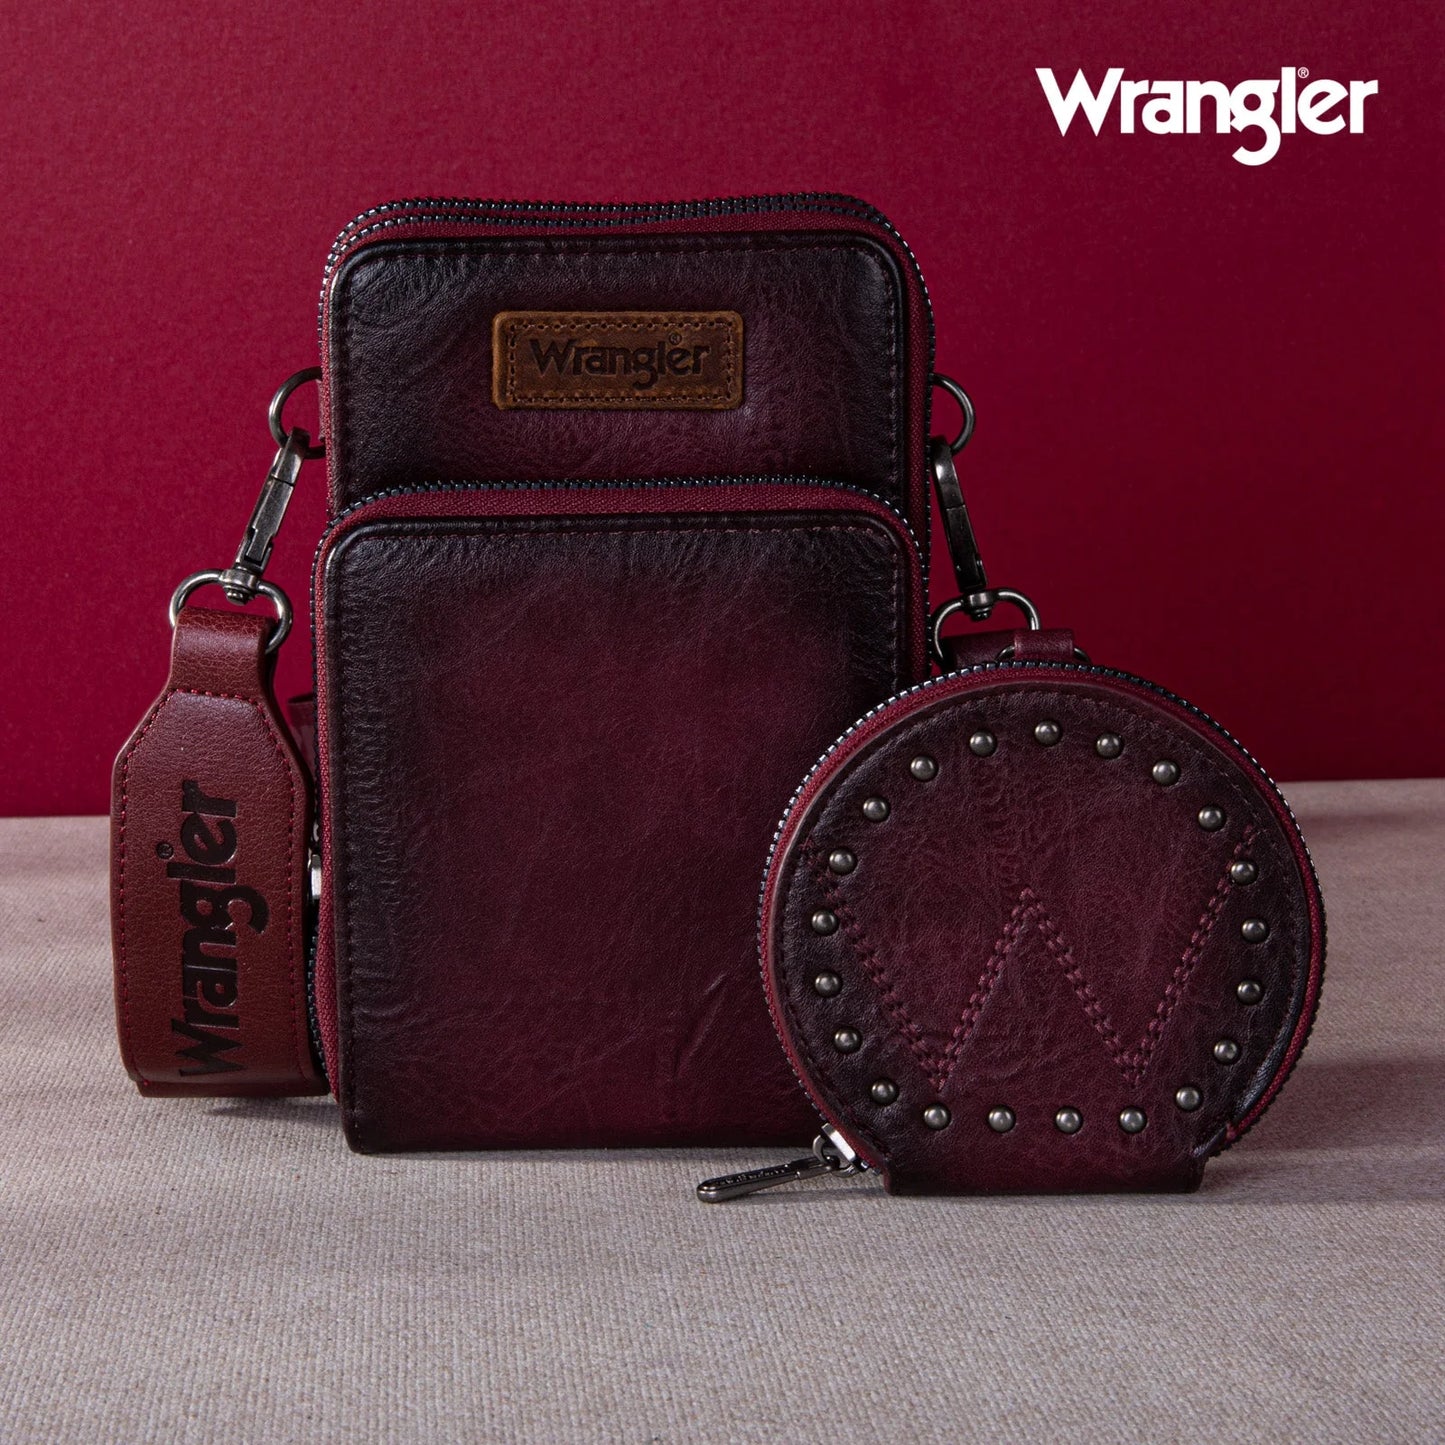 Wrangler Crossbody Cell Phone Purse 3 Zippered Compartment With Coin Pouch - Purple